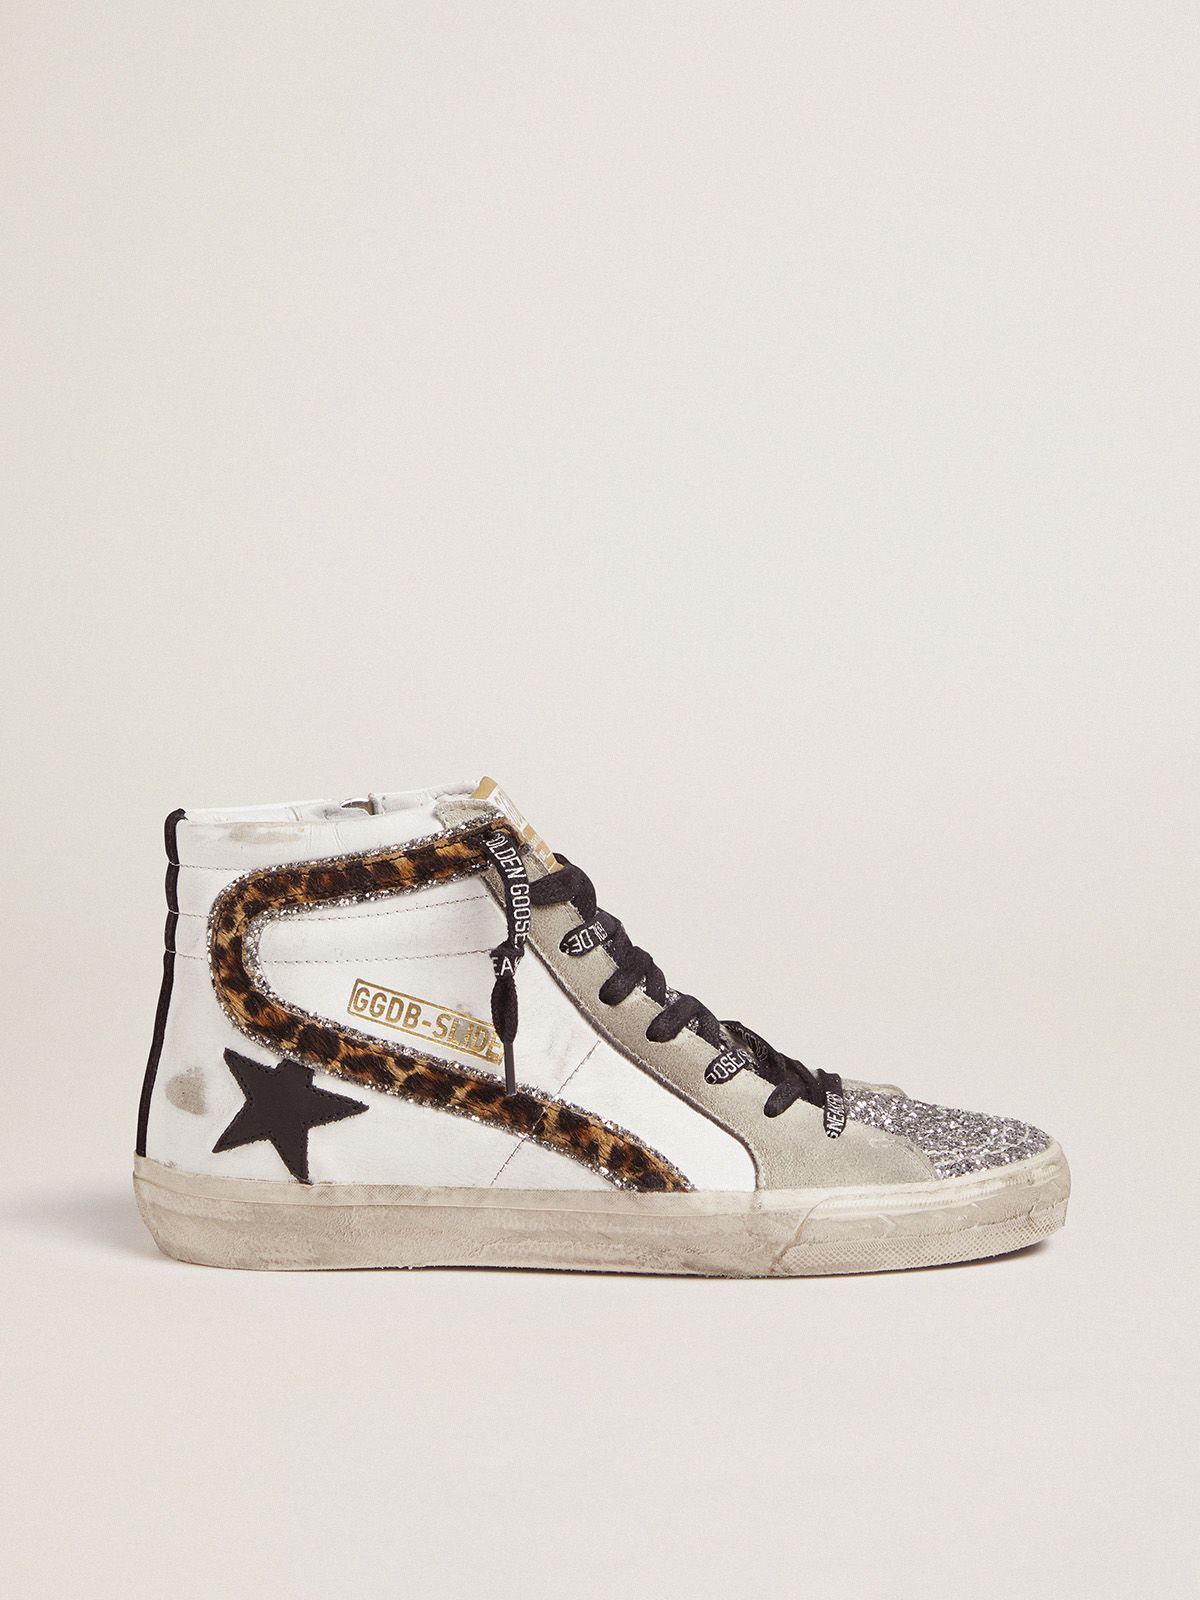 Slide sneakers with glitter and leopard-print flash